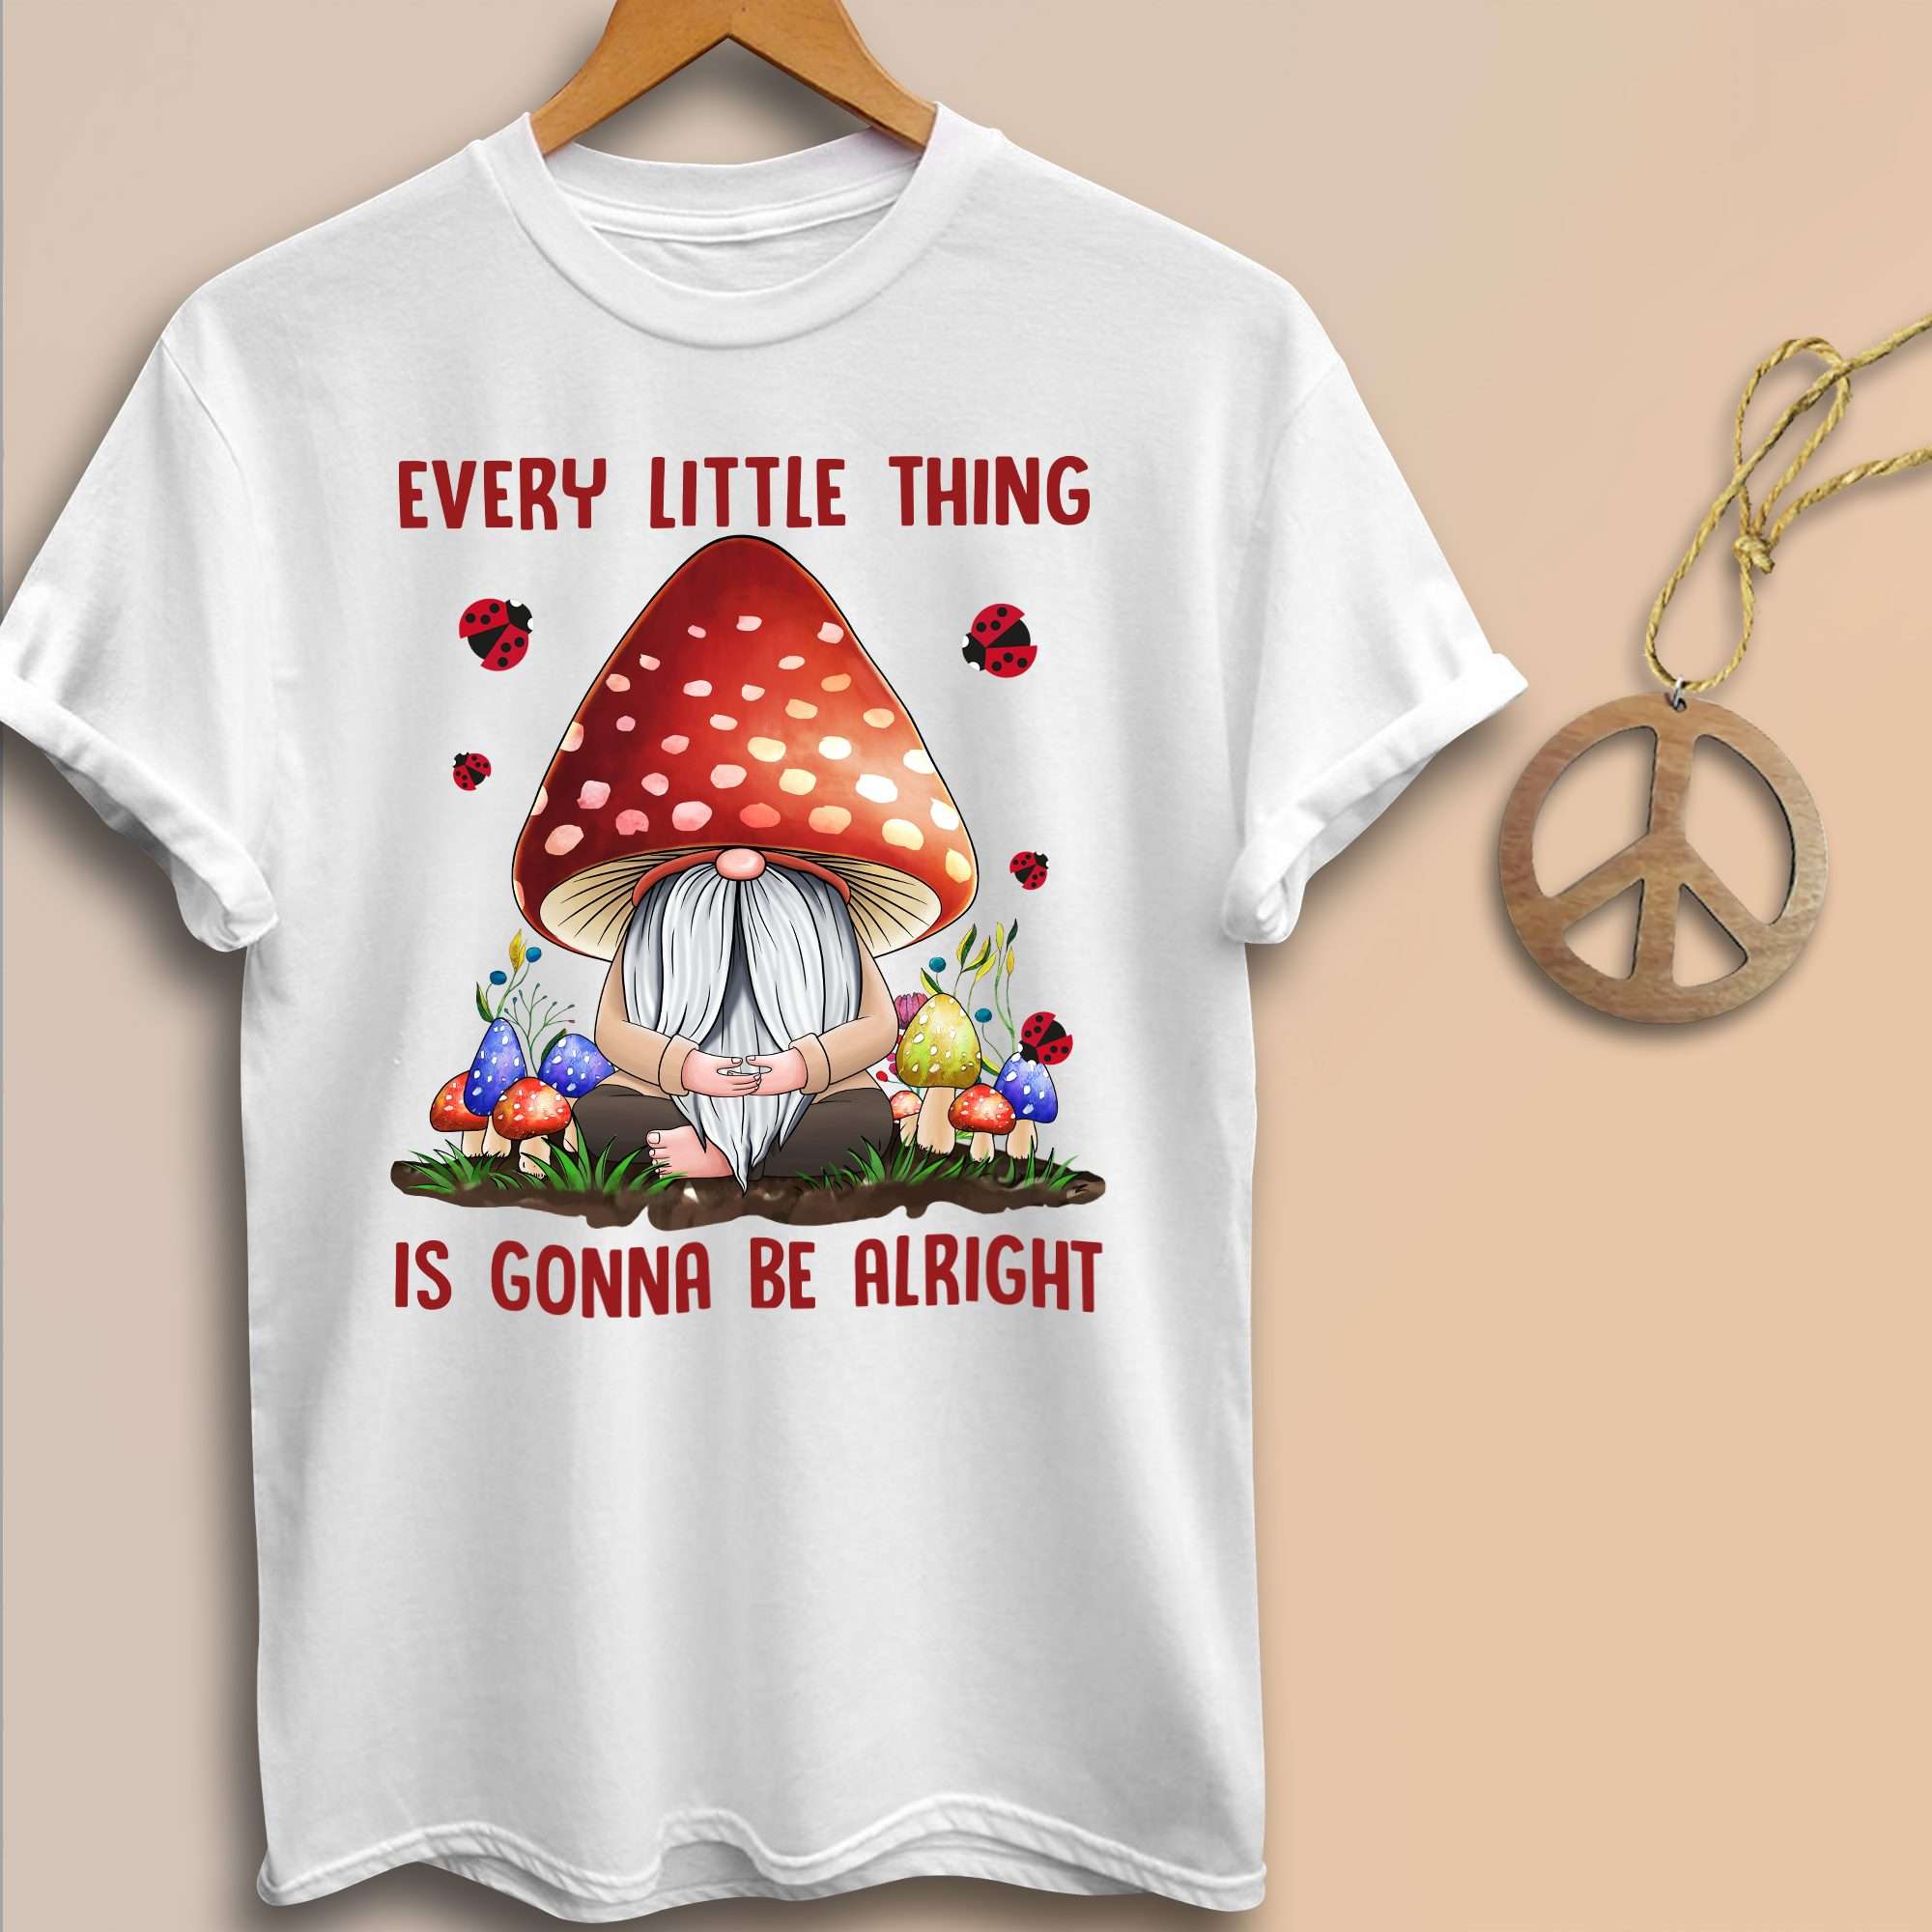 Every little thing is gonna be alright - Peaceful lifestyle, garden gnomes